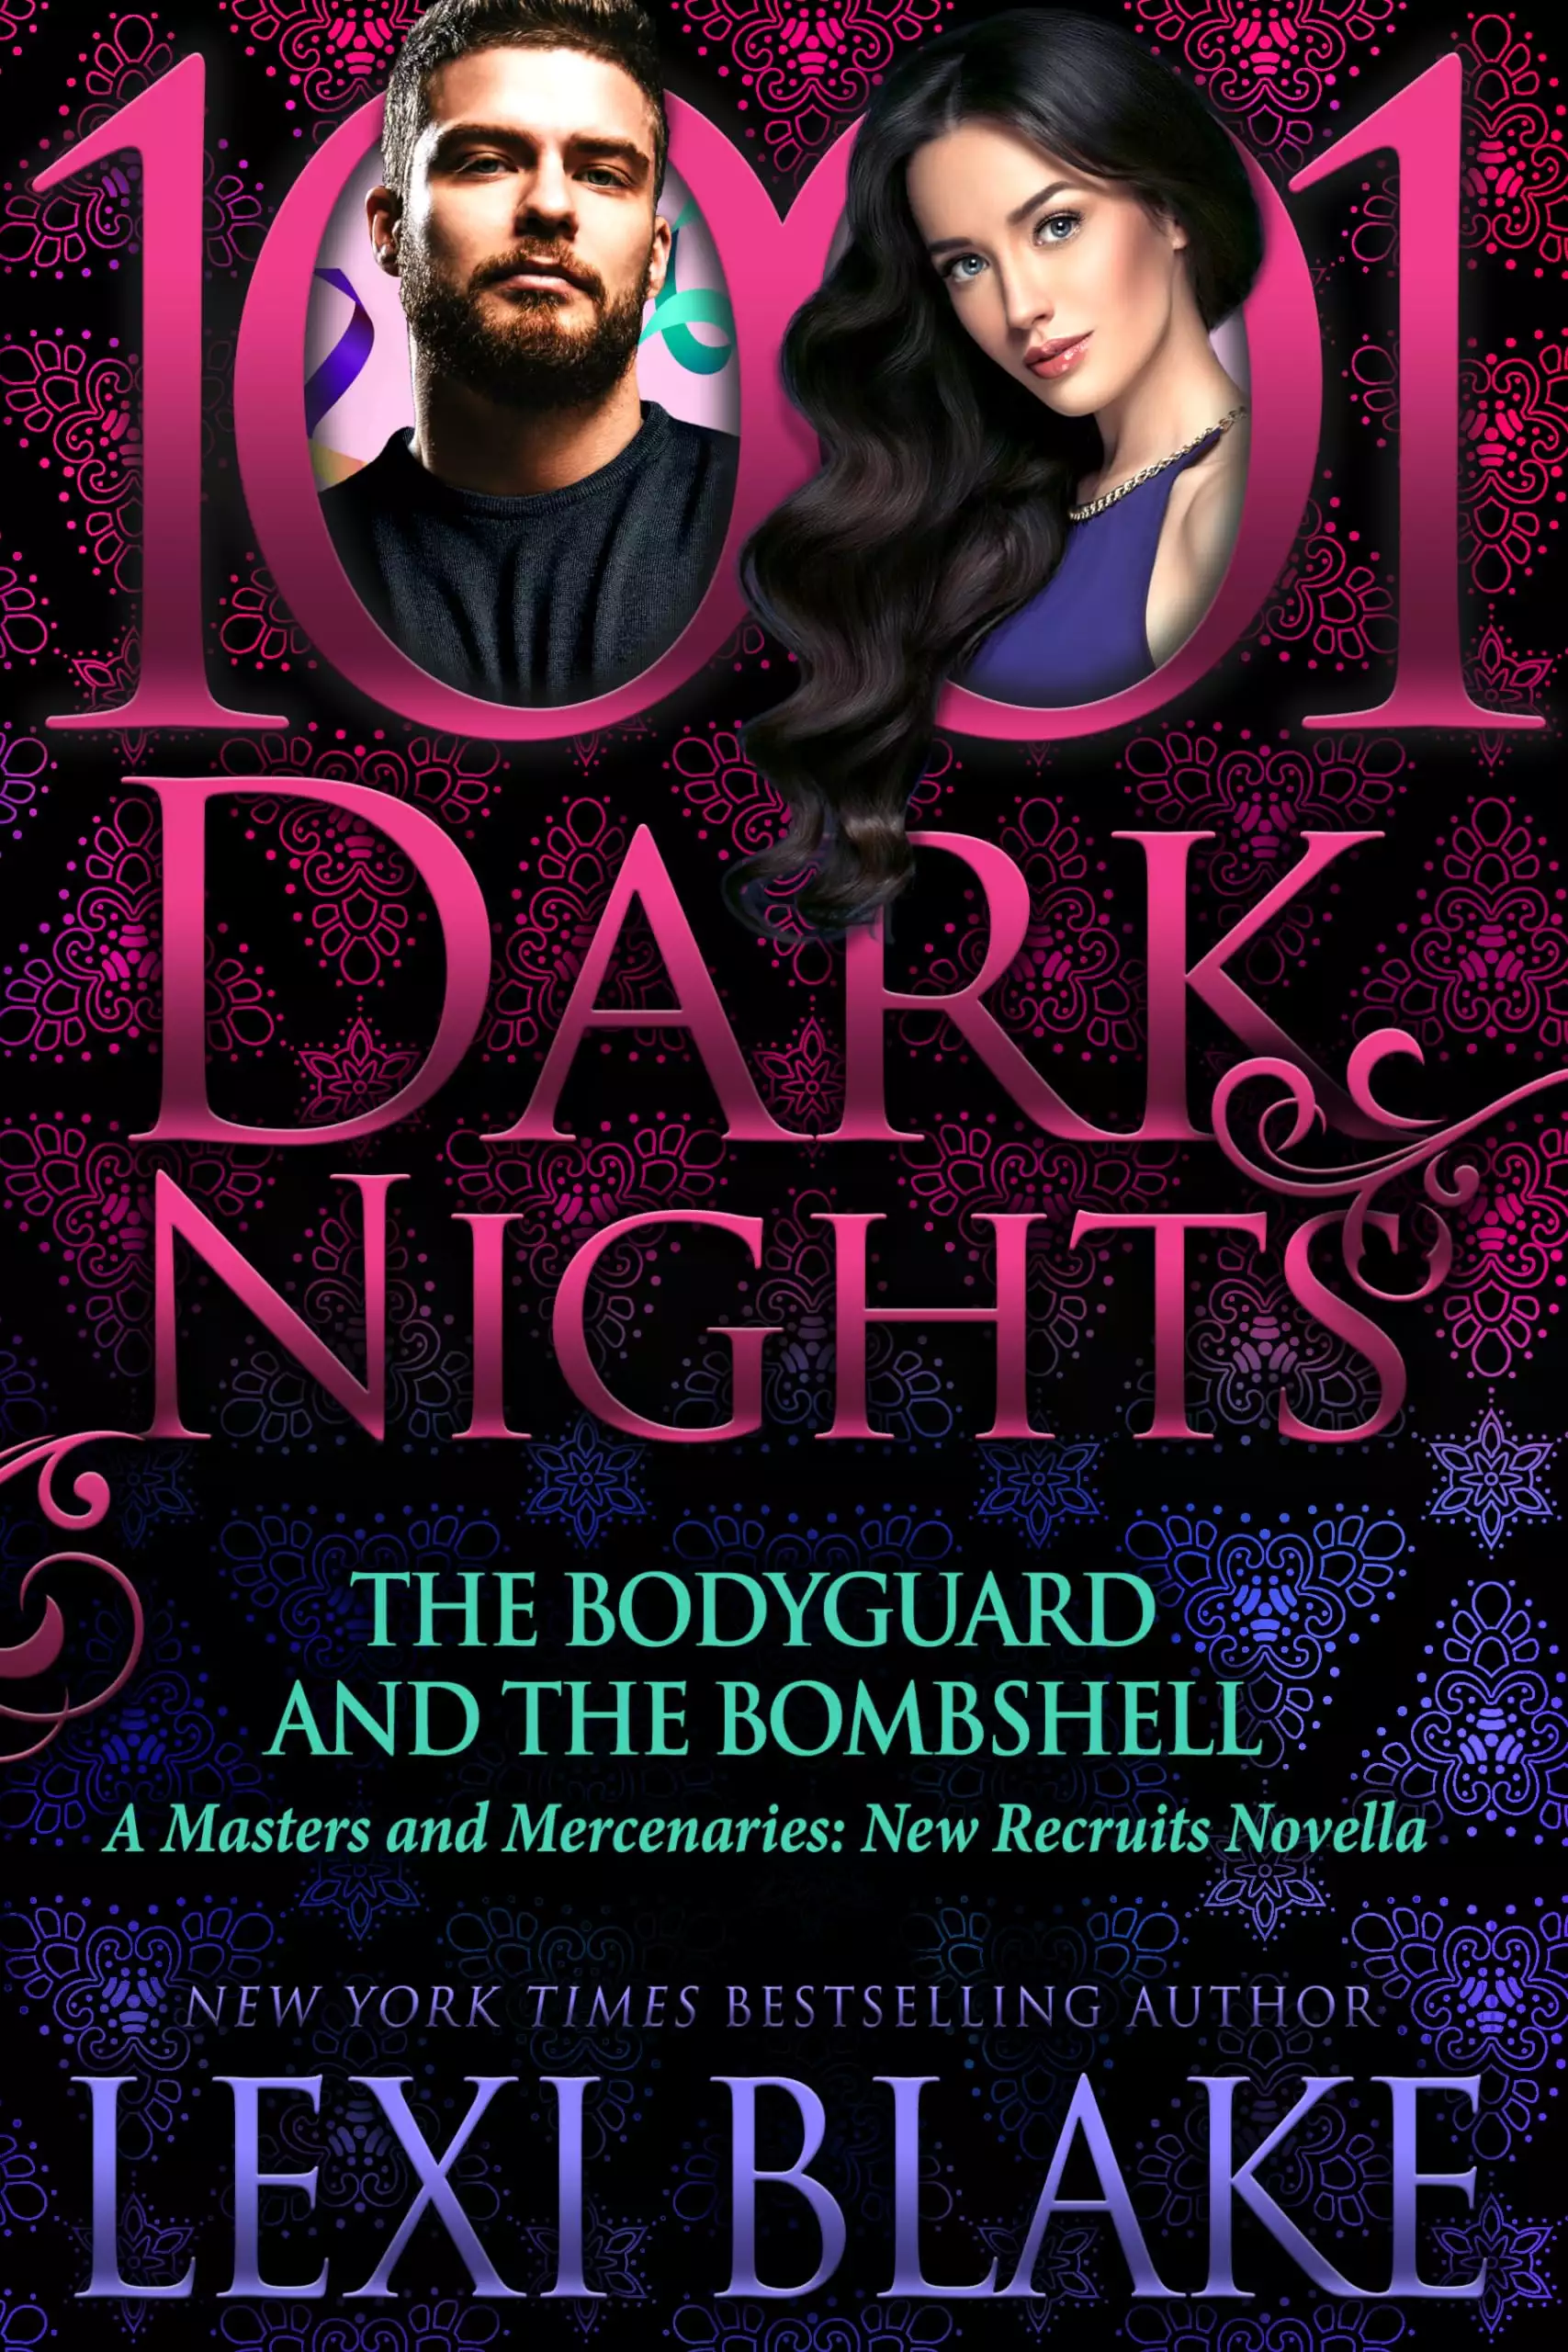 The Bodyguard and the Bombshell: A Masters and Mercenaries: New Recruits Novella